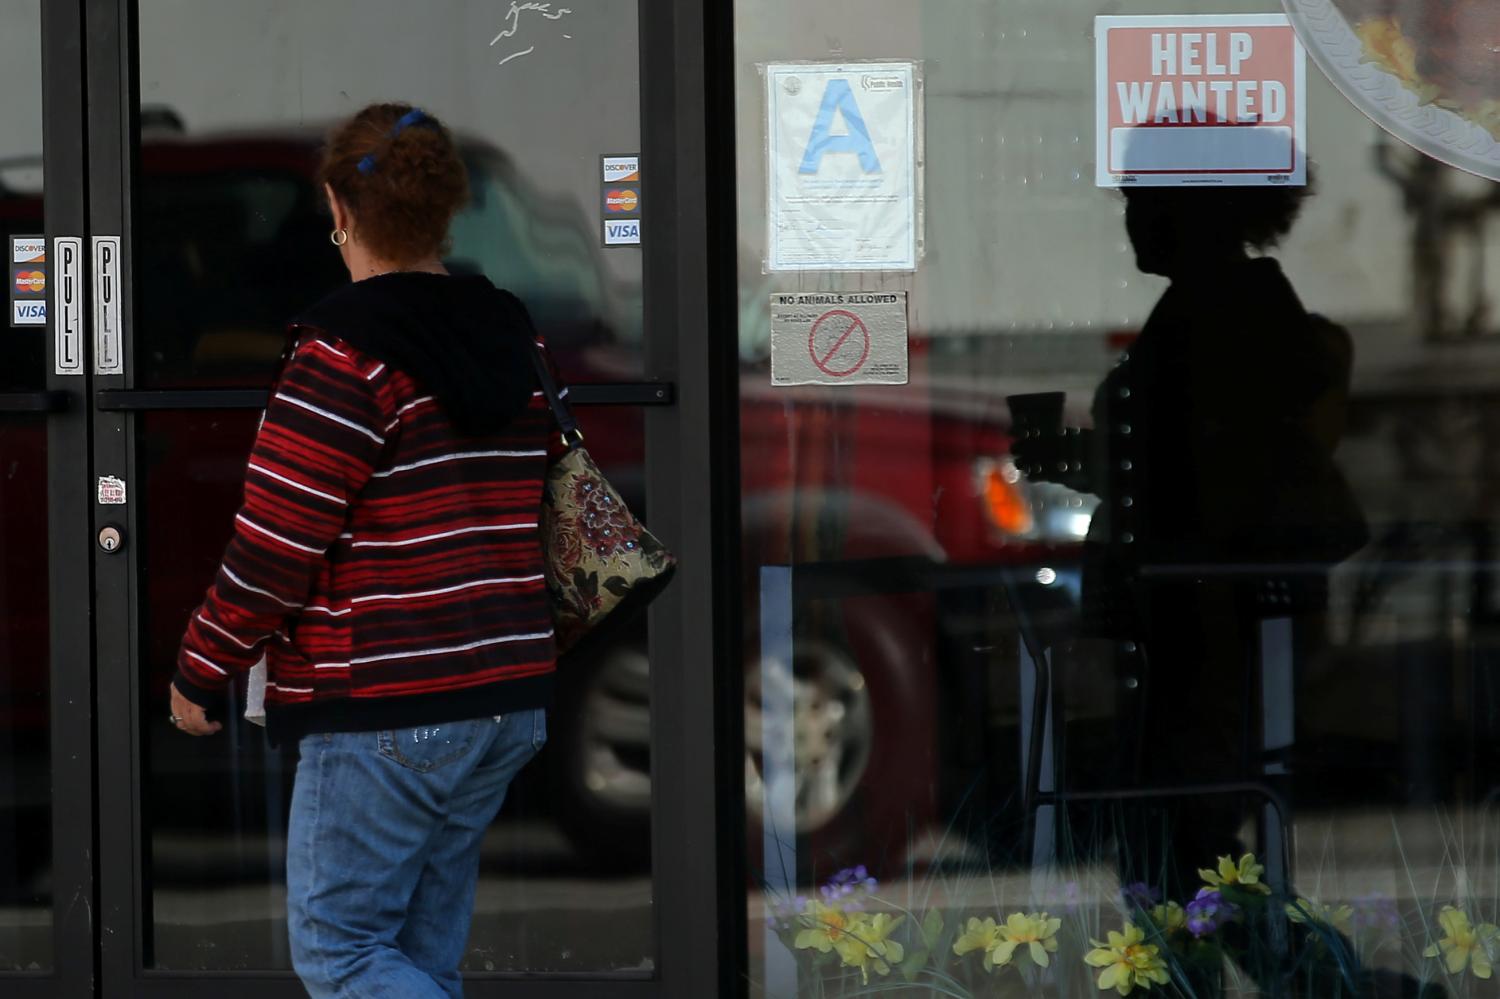 A woman walks past a "help wanted" sign on a restaurant in Los Angeles, California.